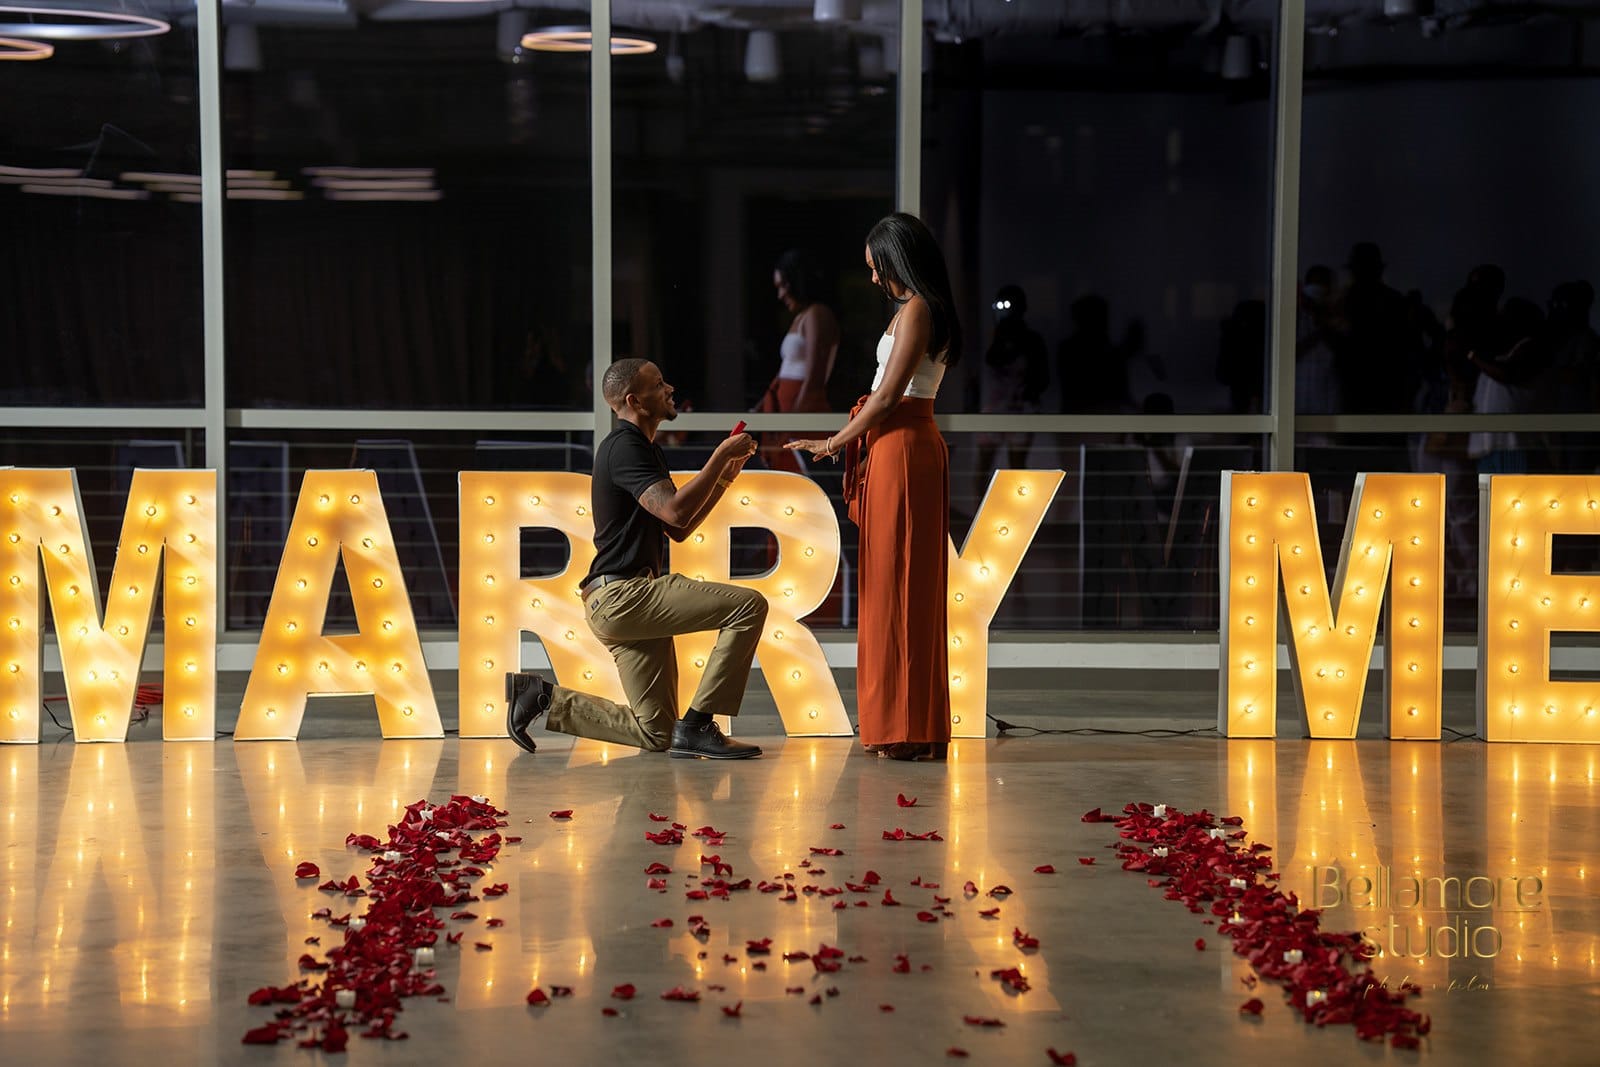 groom to be on one knee proposing to his girlfriend in front of a marry me sign surrounded by rose petals during their downtown orlando marriage proposal.